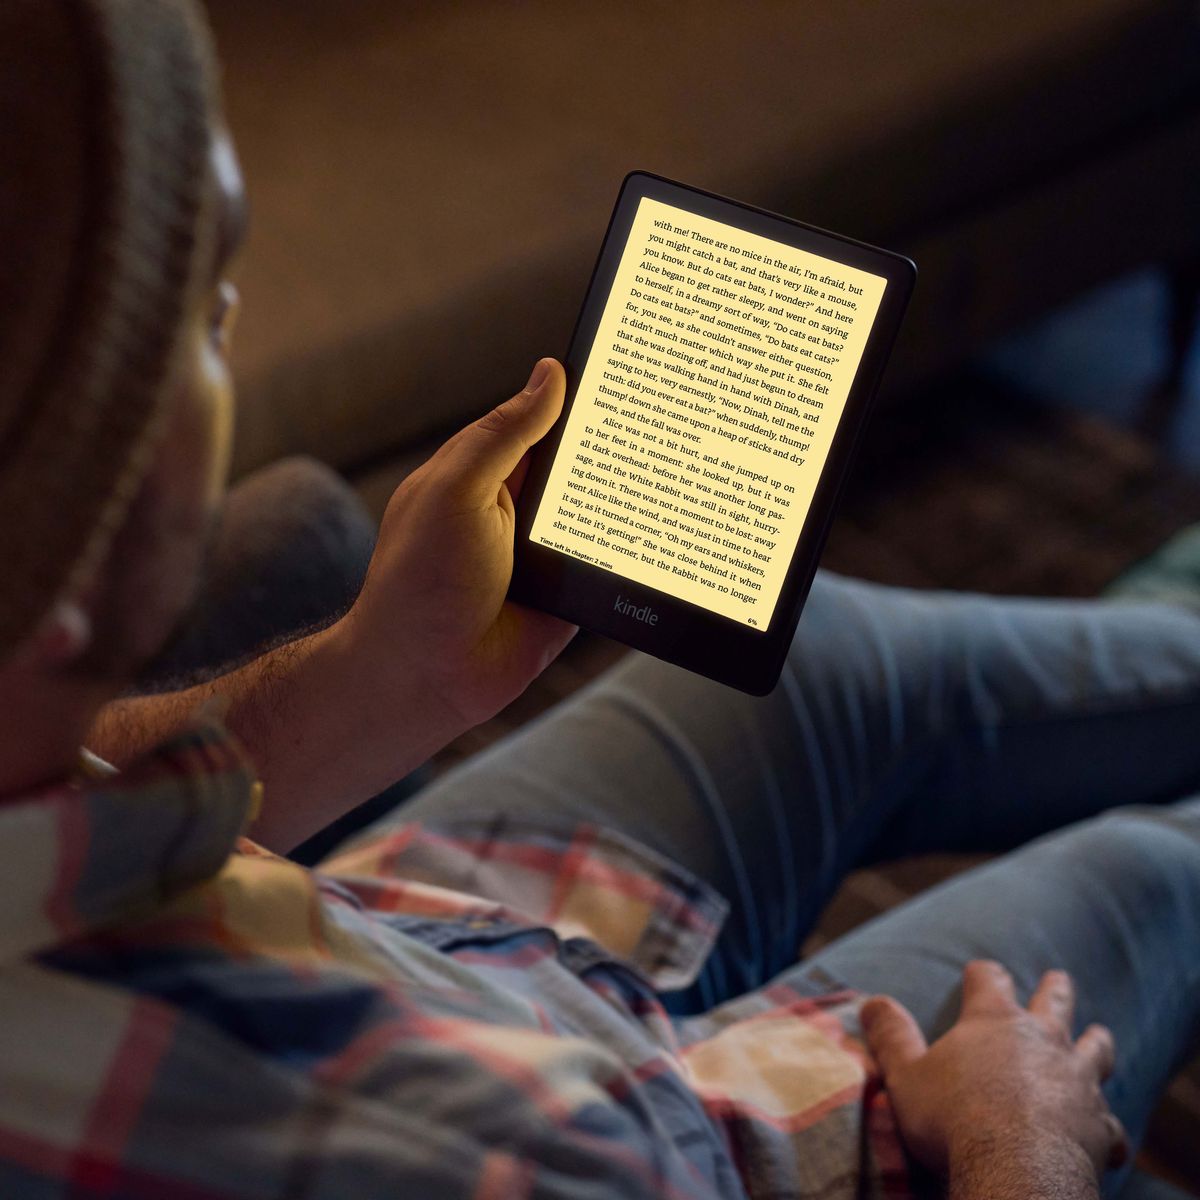 launches new Kindle Paperwhite e-readers: What you should know